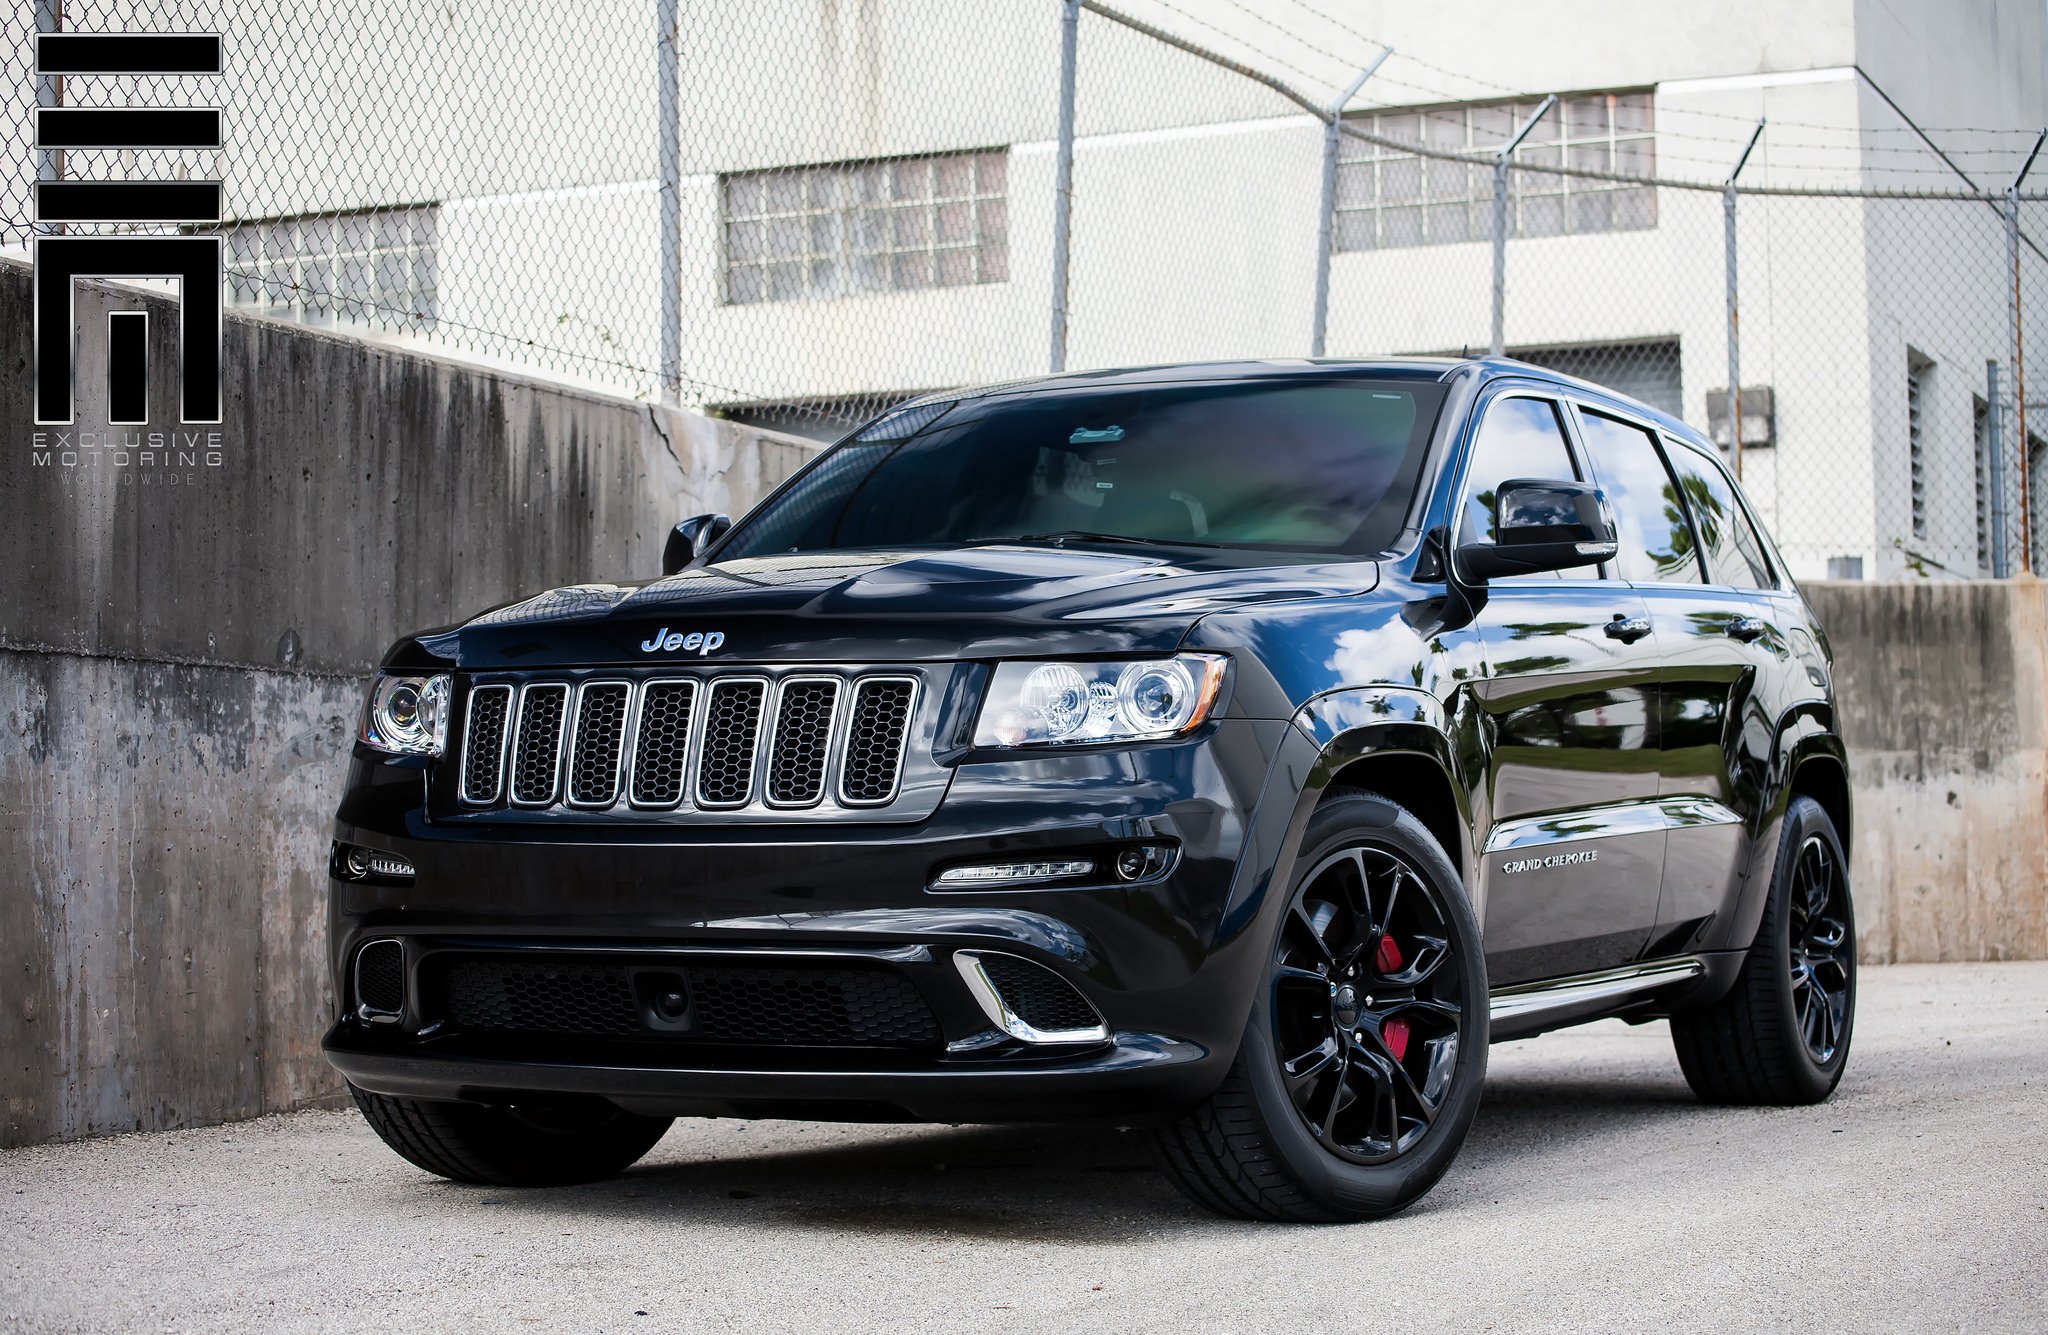 SRT 8 Grand Cherokee - Photo by Exclusive Motoring